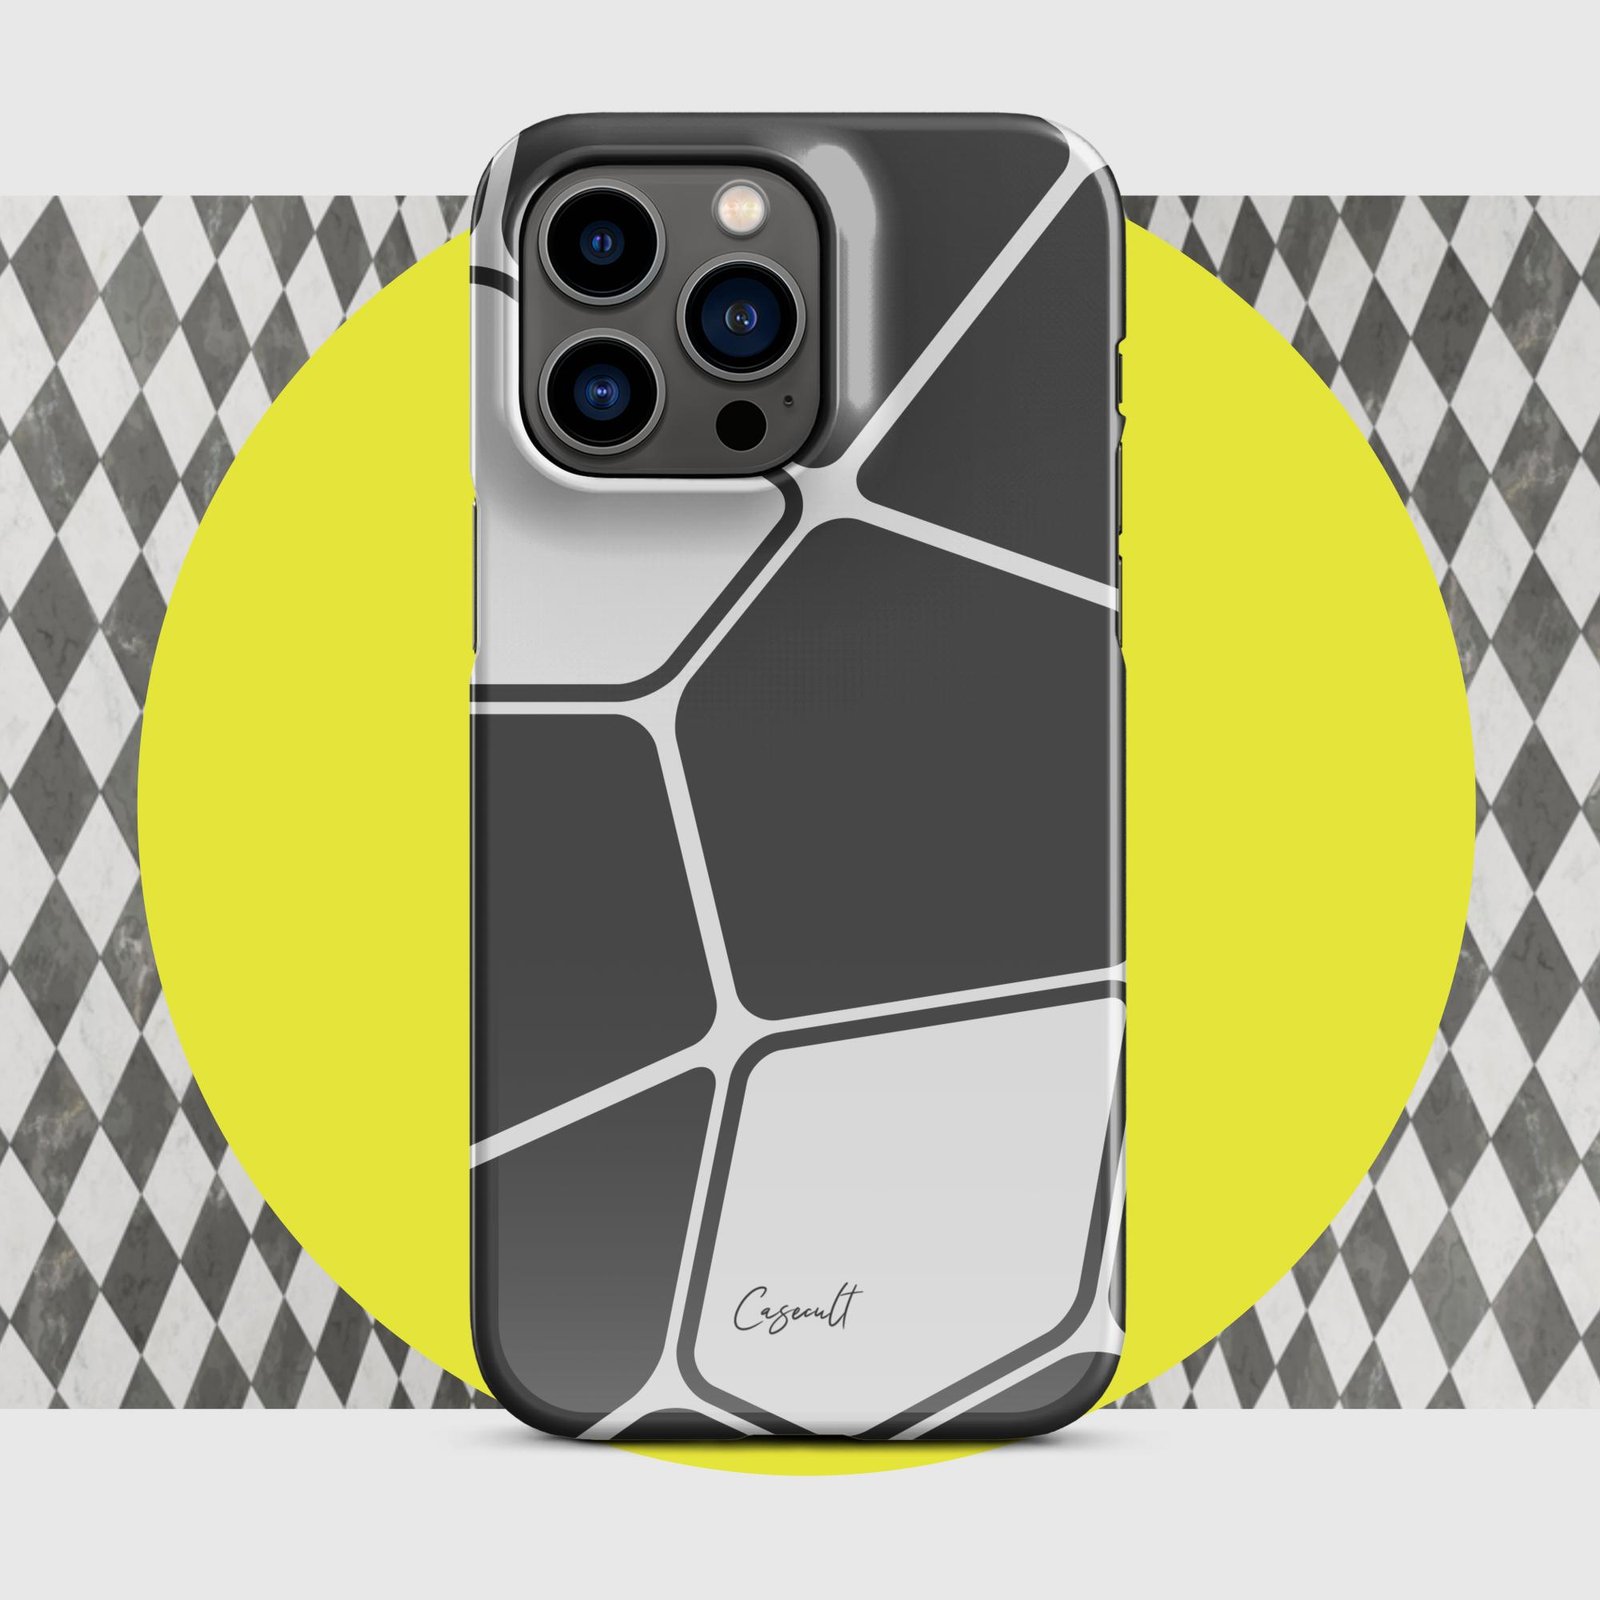 snap-case-for-iphone-glossy-iphone-14-pro-max-front-659661eca3d08.jpg